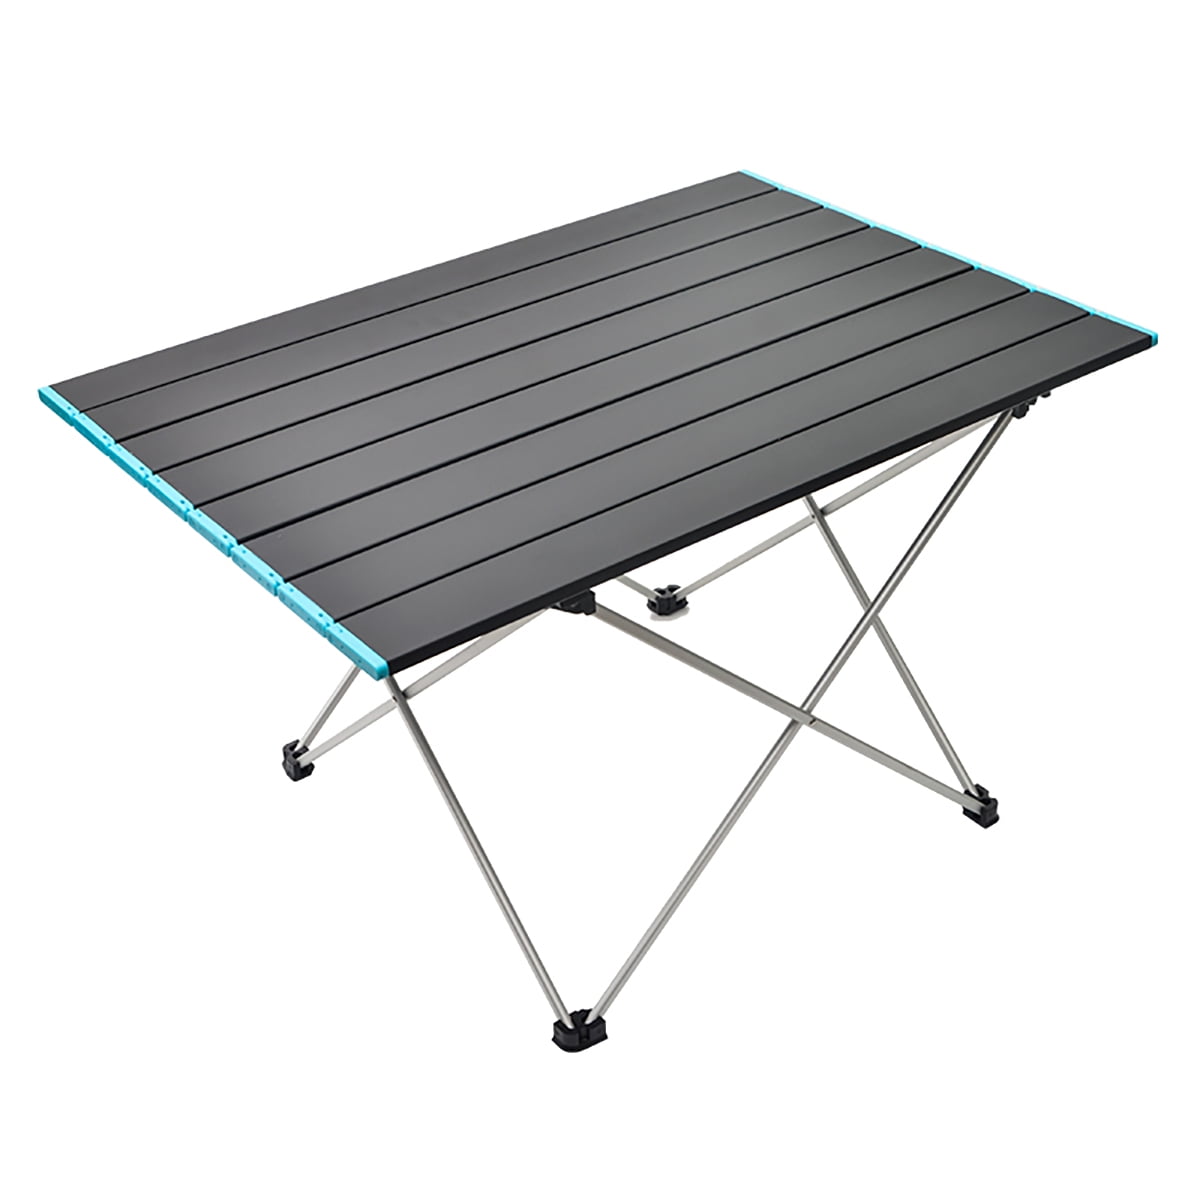 Lightweight Aluminum Table with Carrying Bag for Outdoor and Home Easy to Clean. 56×41×40 cm A plus life Camping Table Portable Outdoor Folding Table 